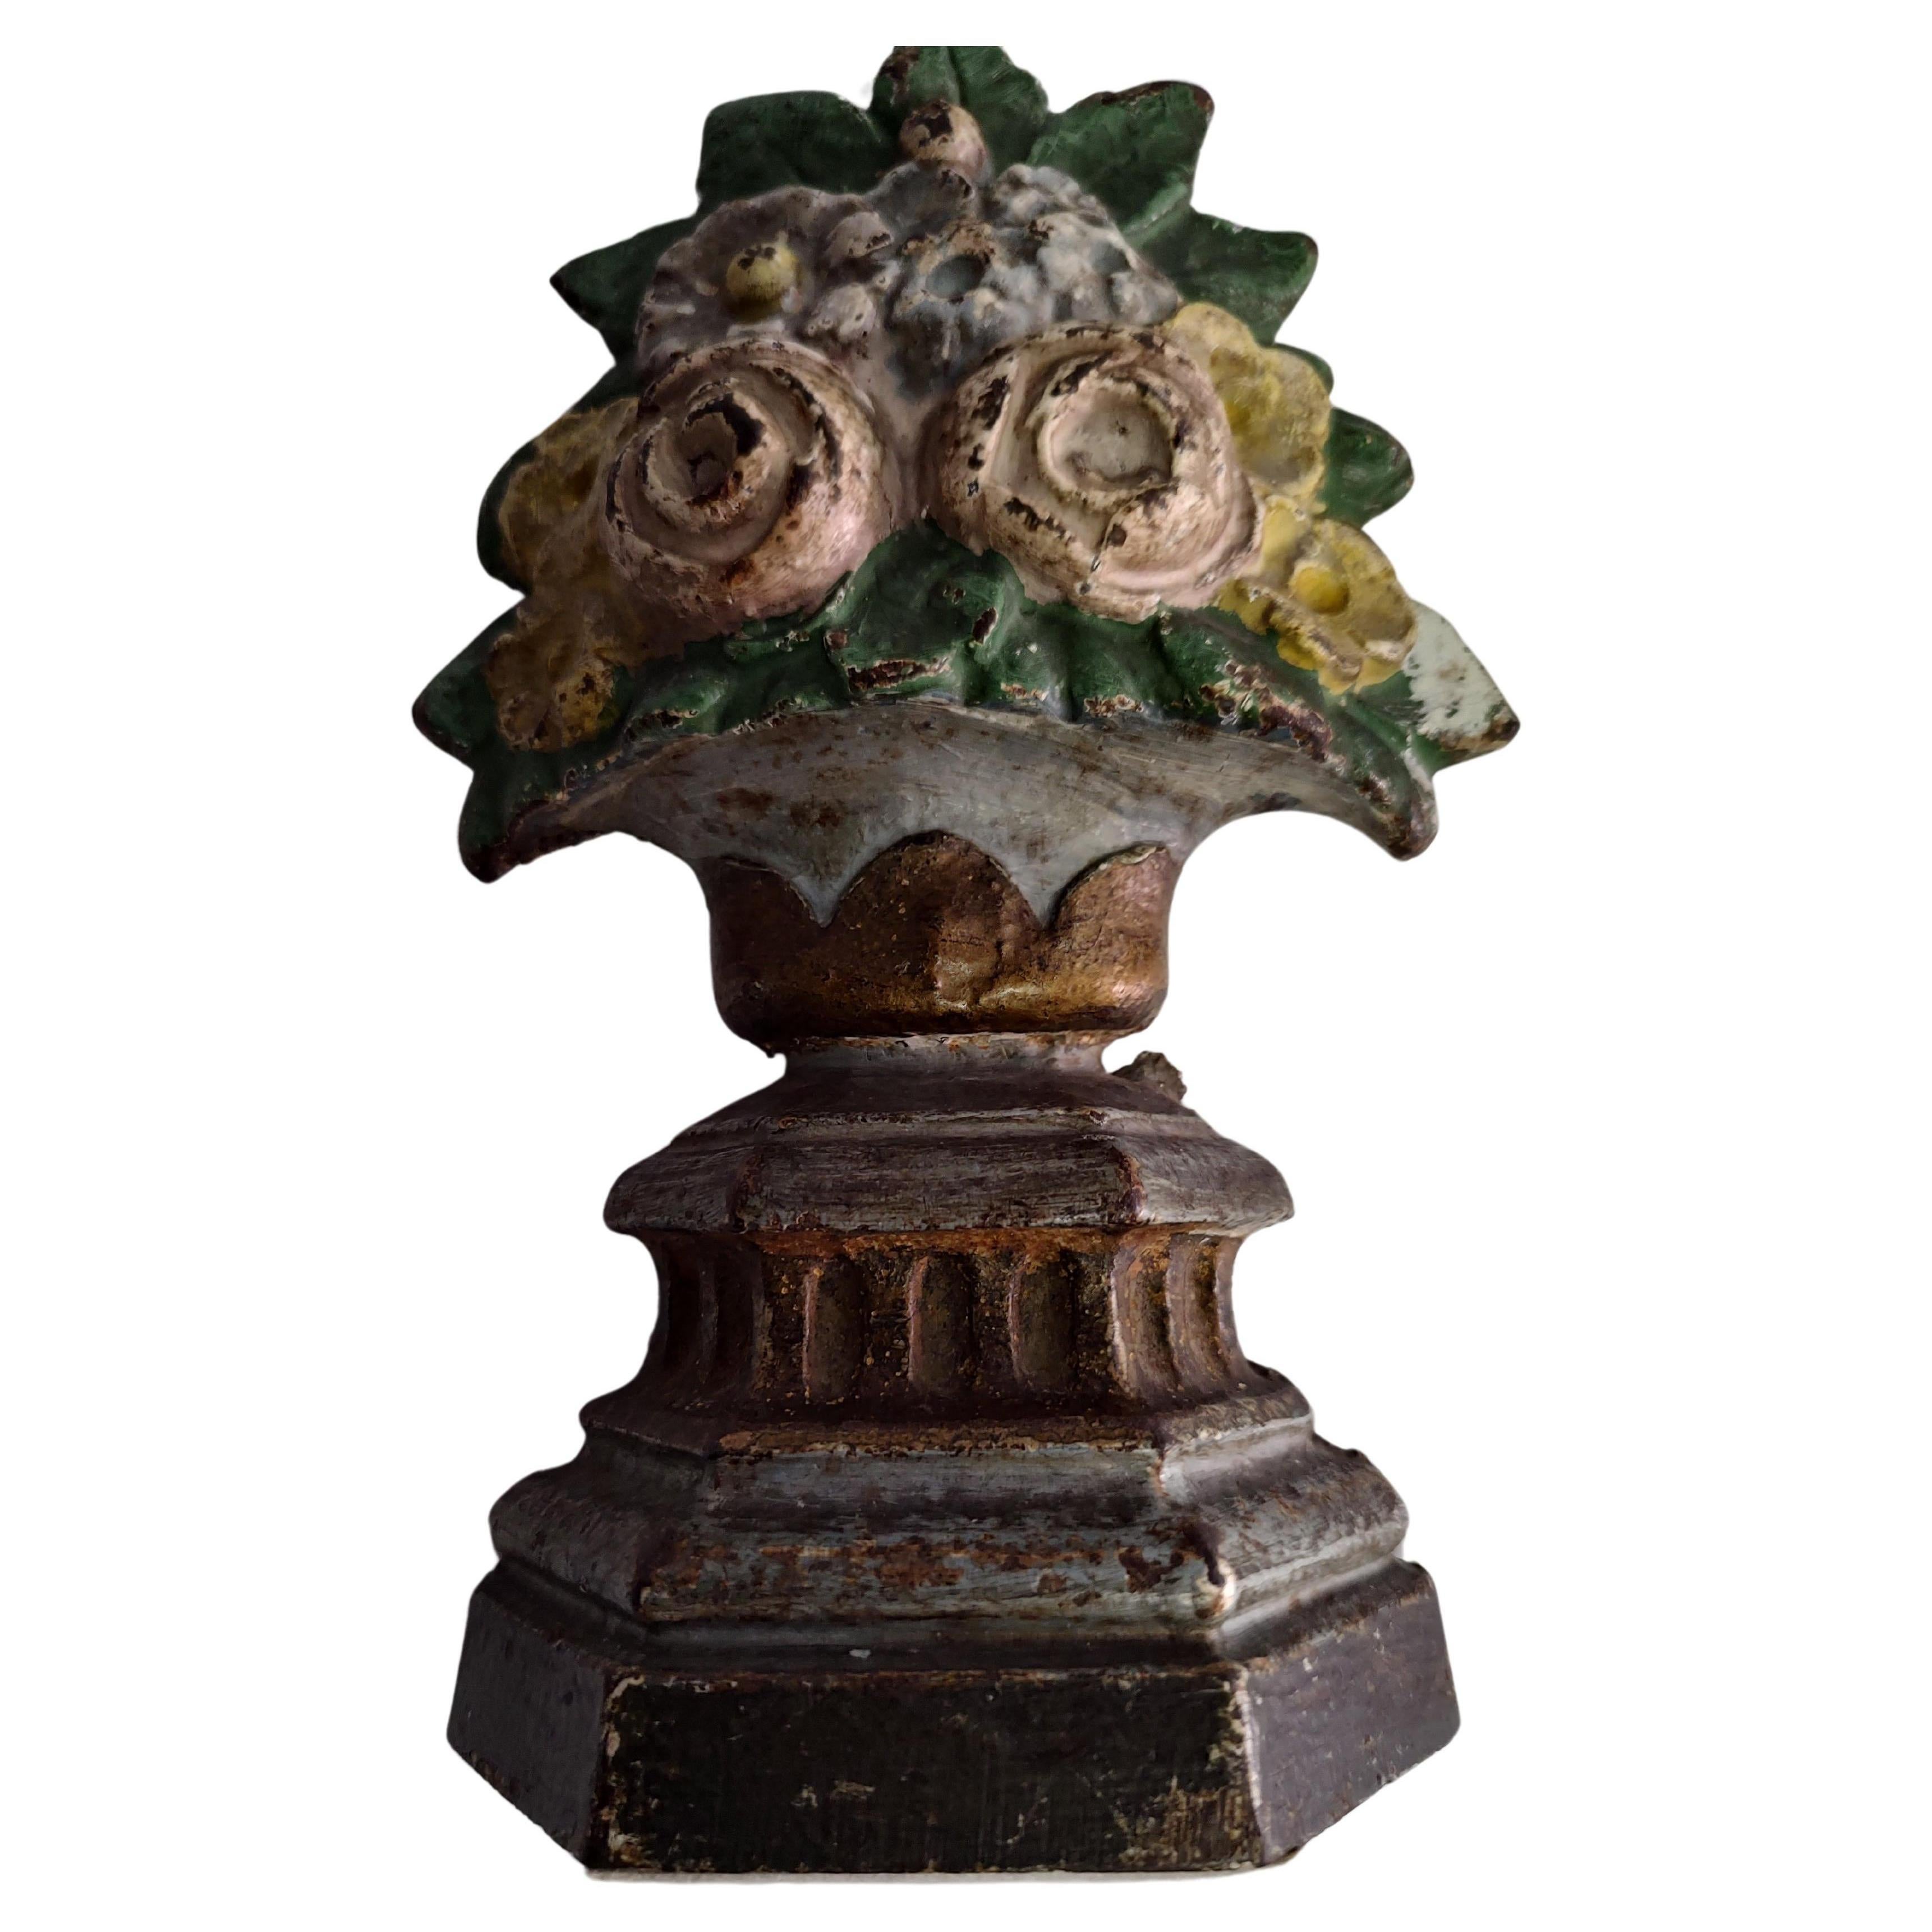 Antique cast iron Doorstops by Hubley in original paint. No breaks or cracks in excellent vintage condition with minimal wear to the paint. Flowers in a red basket, flowers in a urn. Priced and sold individually. Recently purchased a collection so a